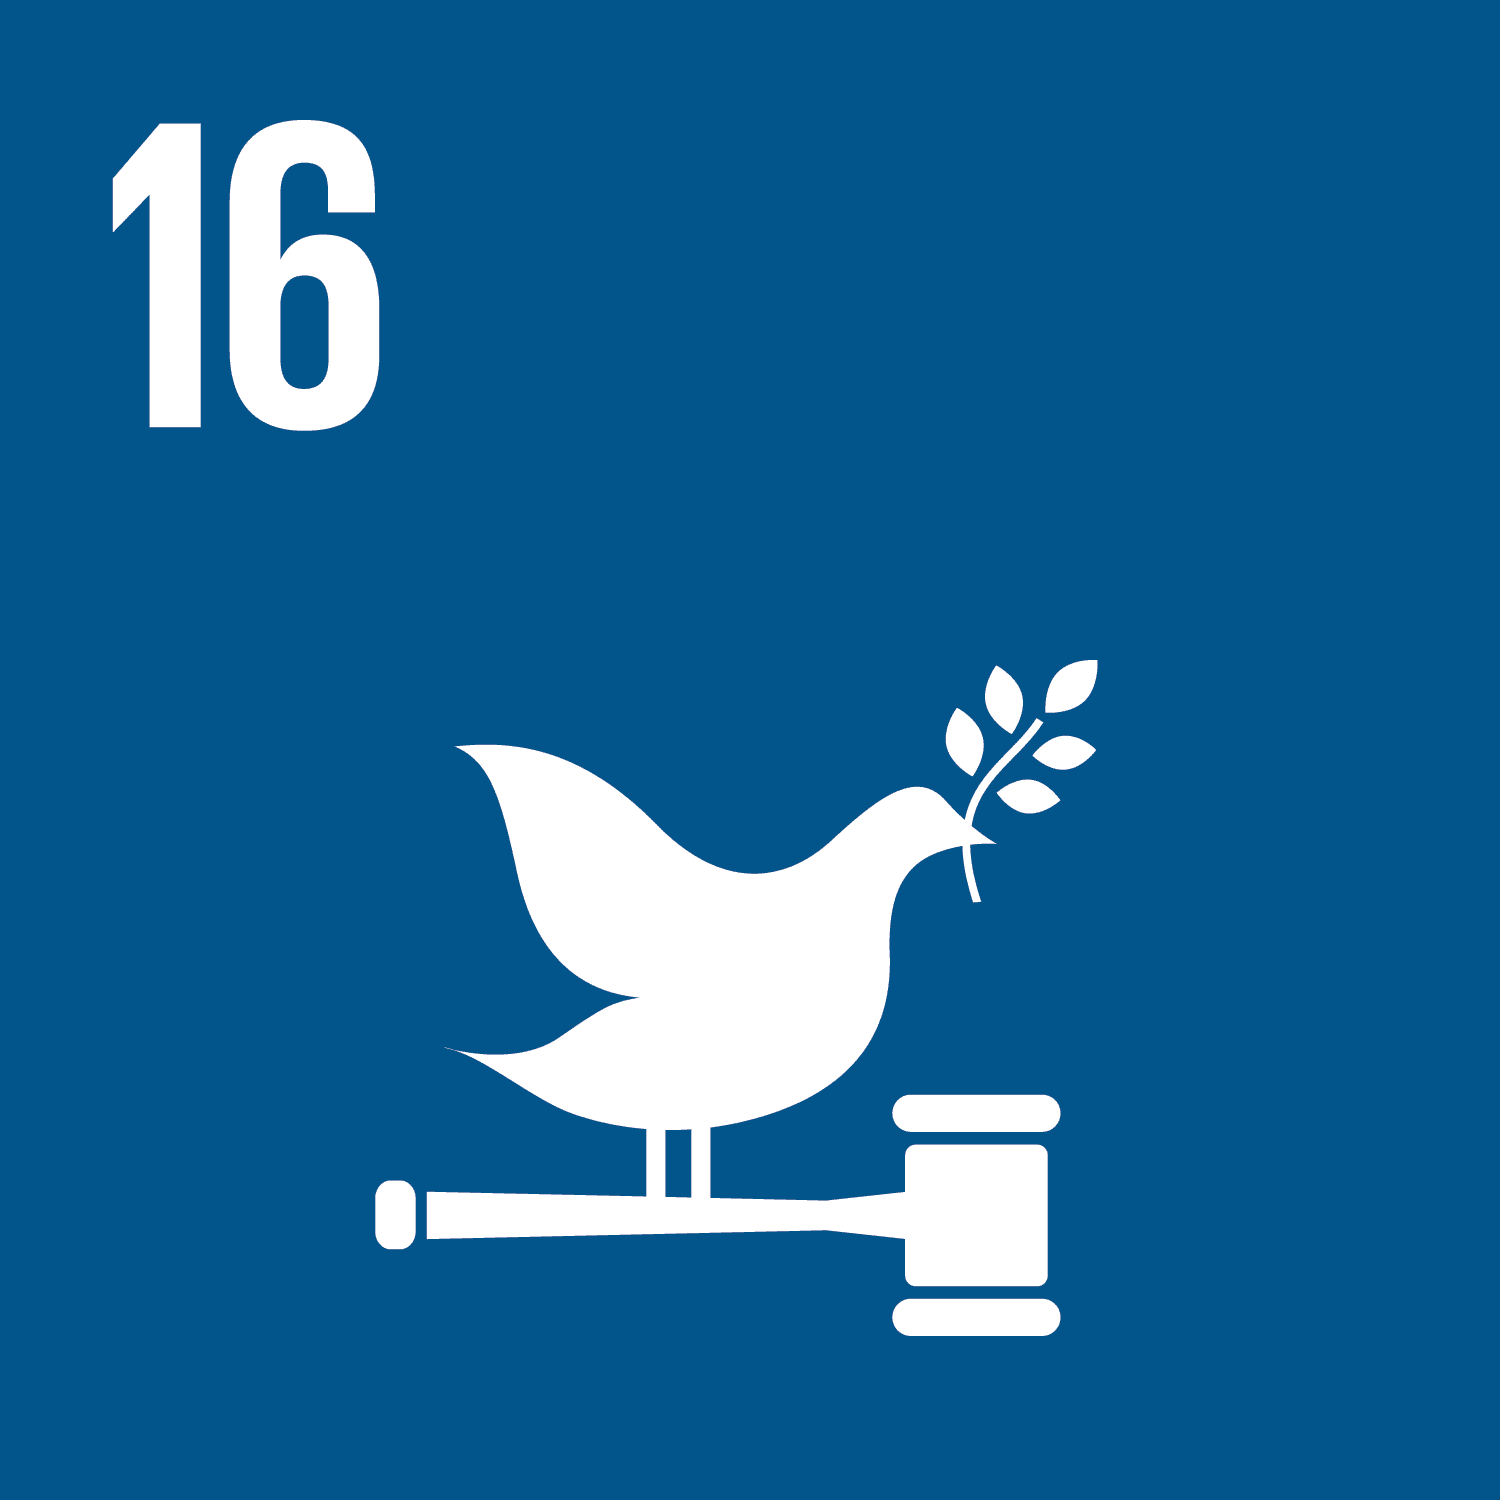 SDG 16. Peace, justice and strong institutions.